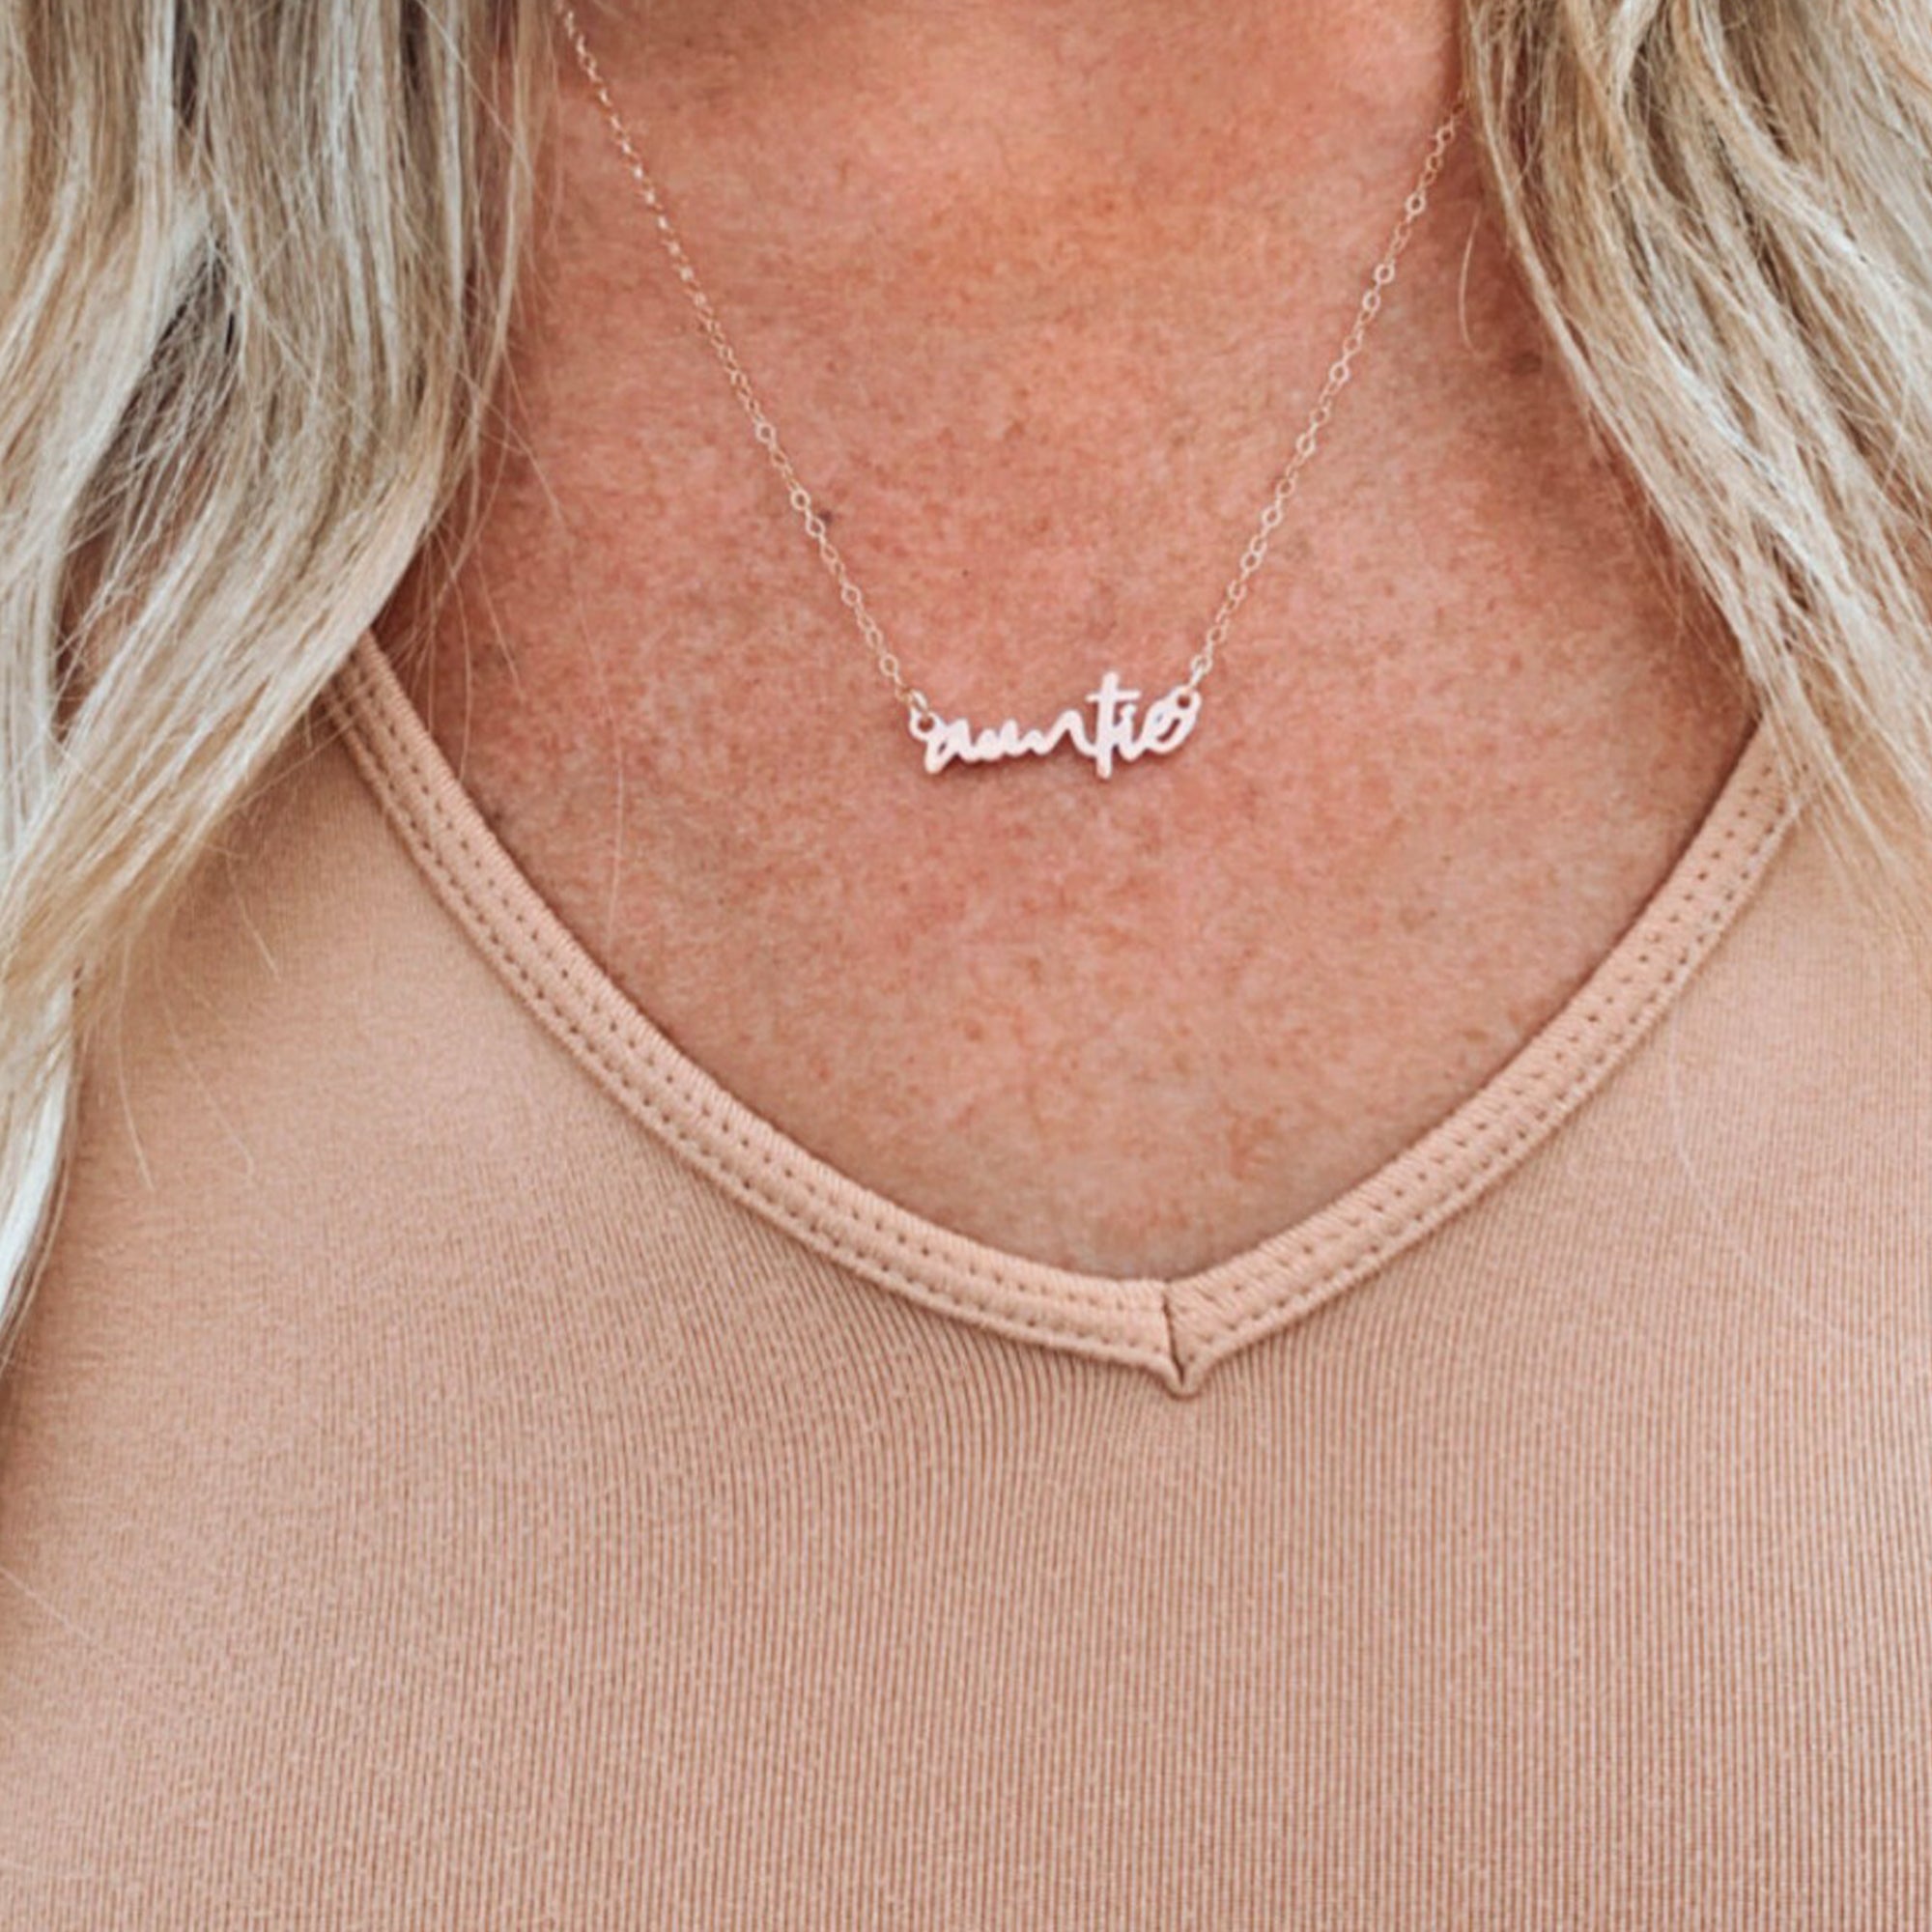 Auntie - Gift for Aunt - Personalized Name Necklace